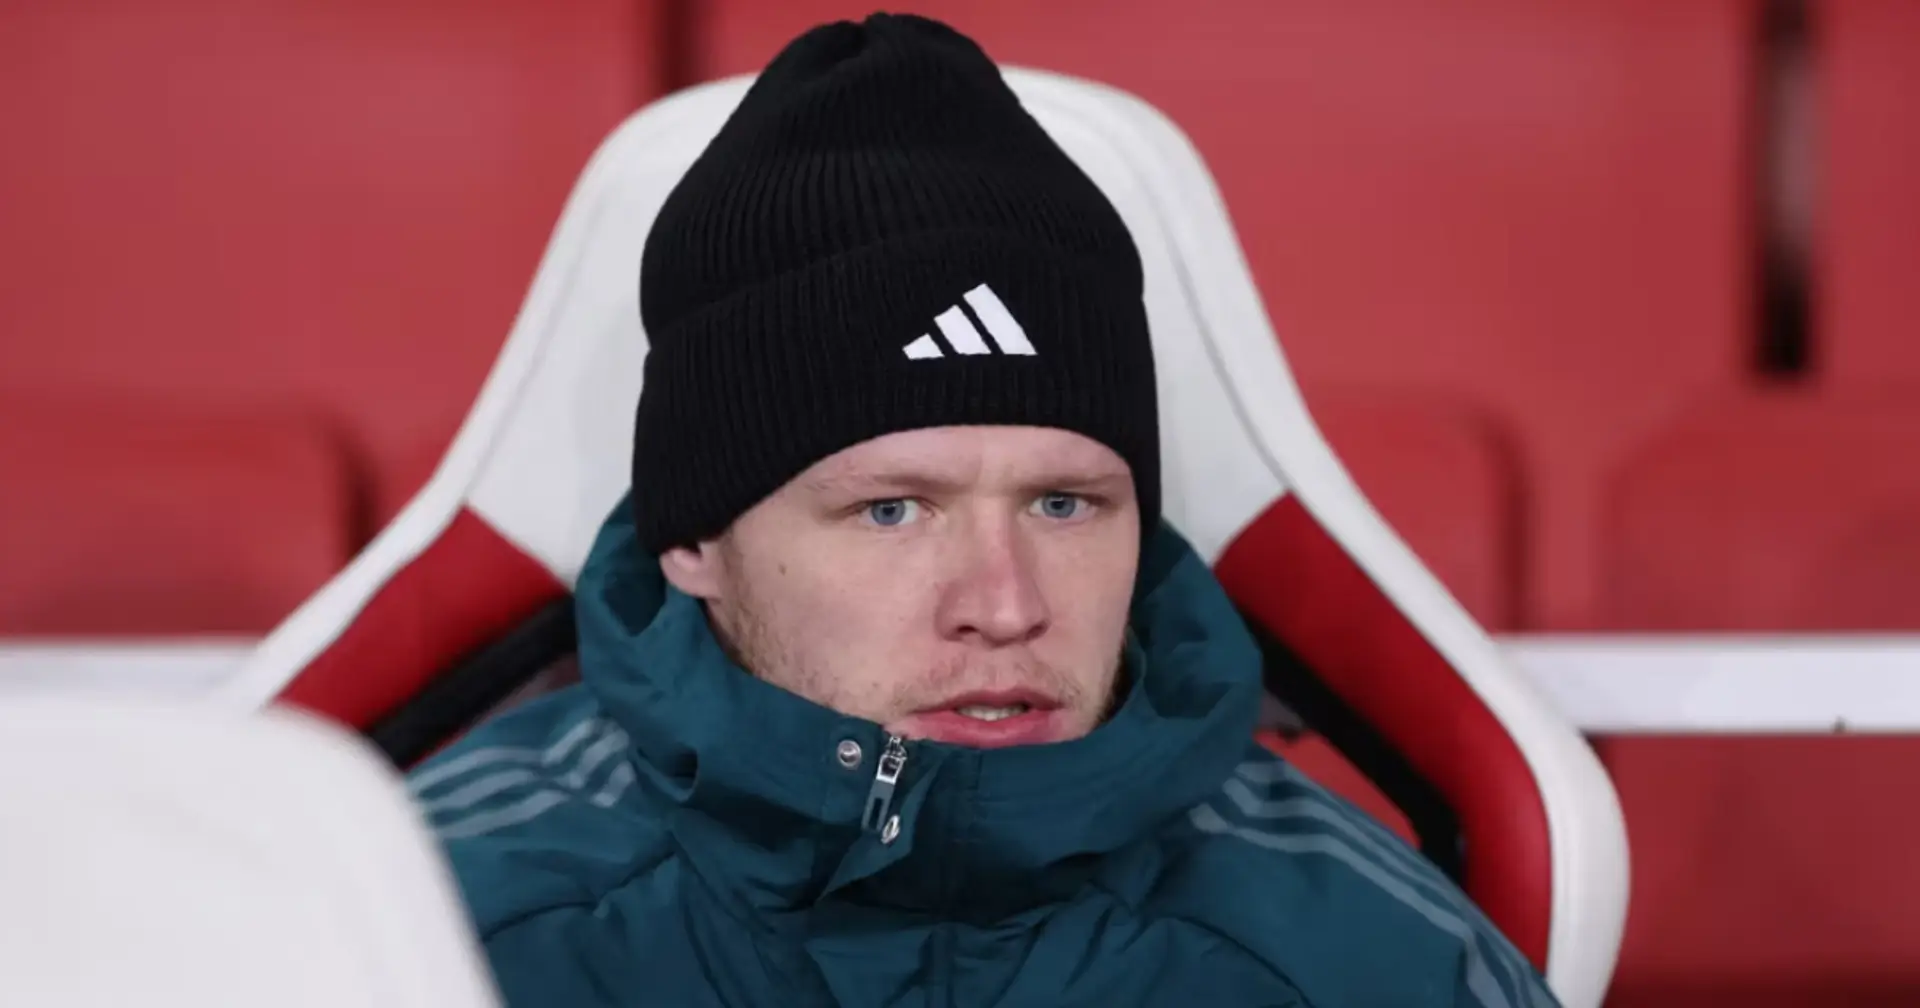 Arsenal make Aaron Ramsdale decision ahead of January (reliability: 3 stars)